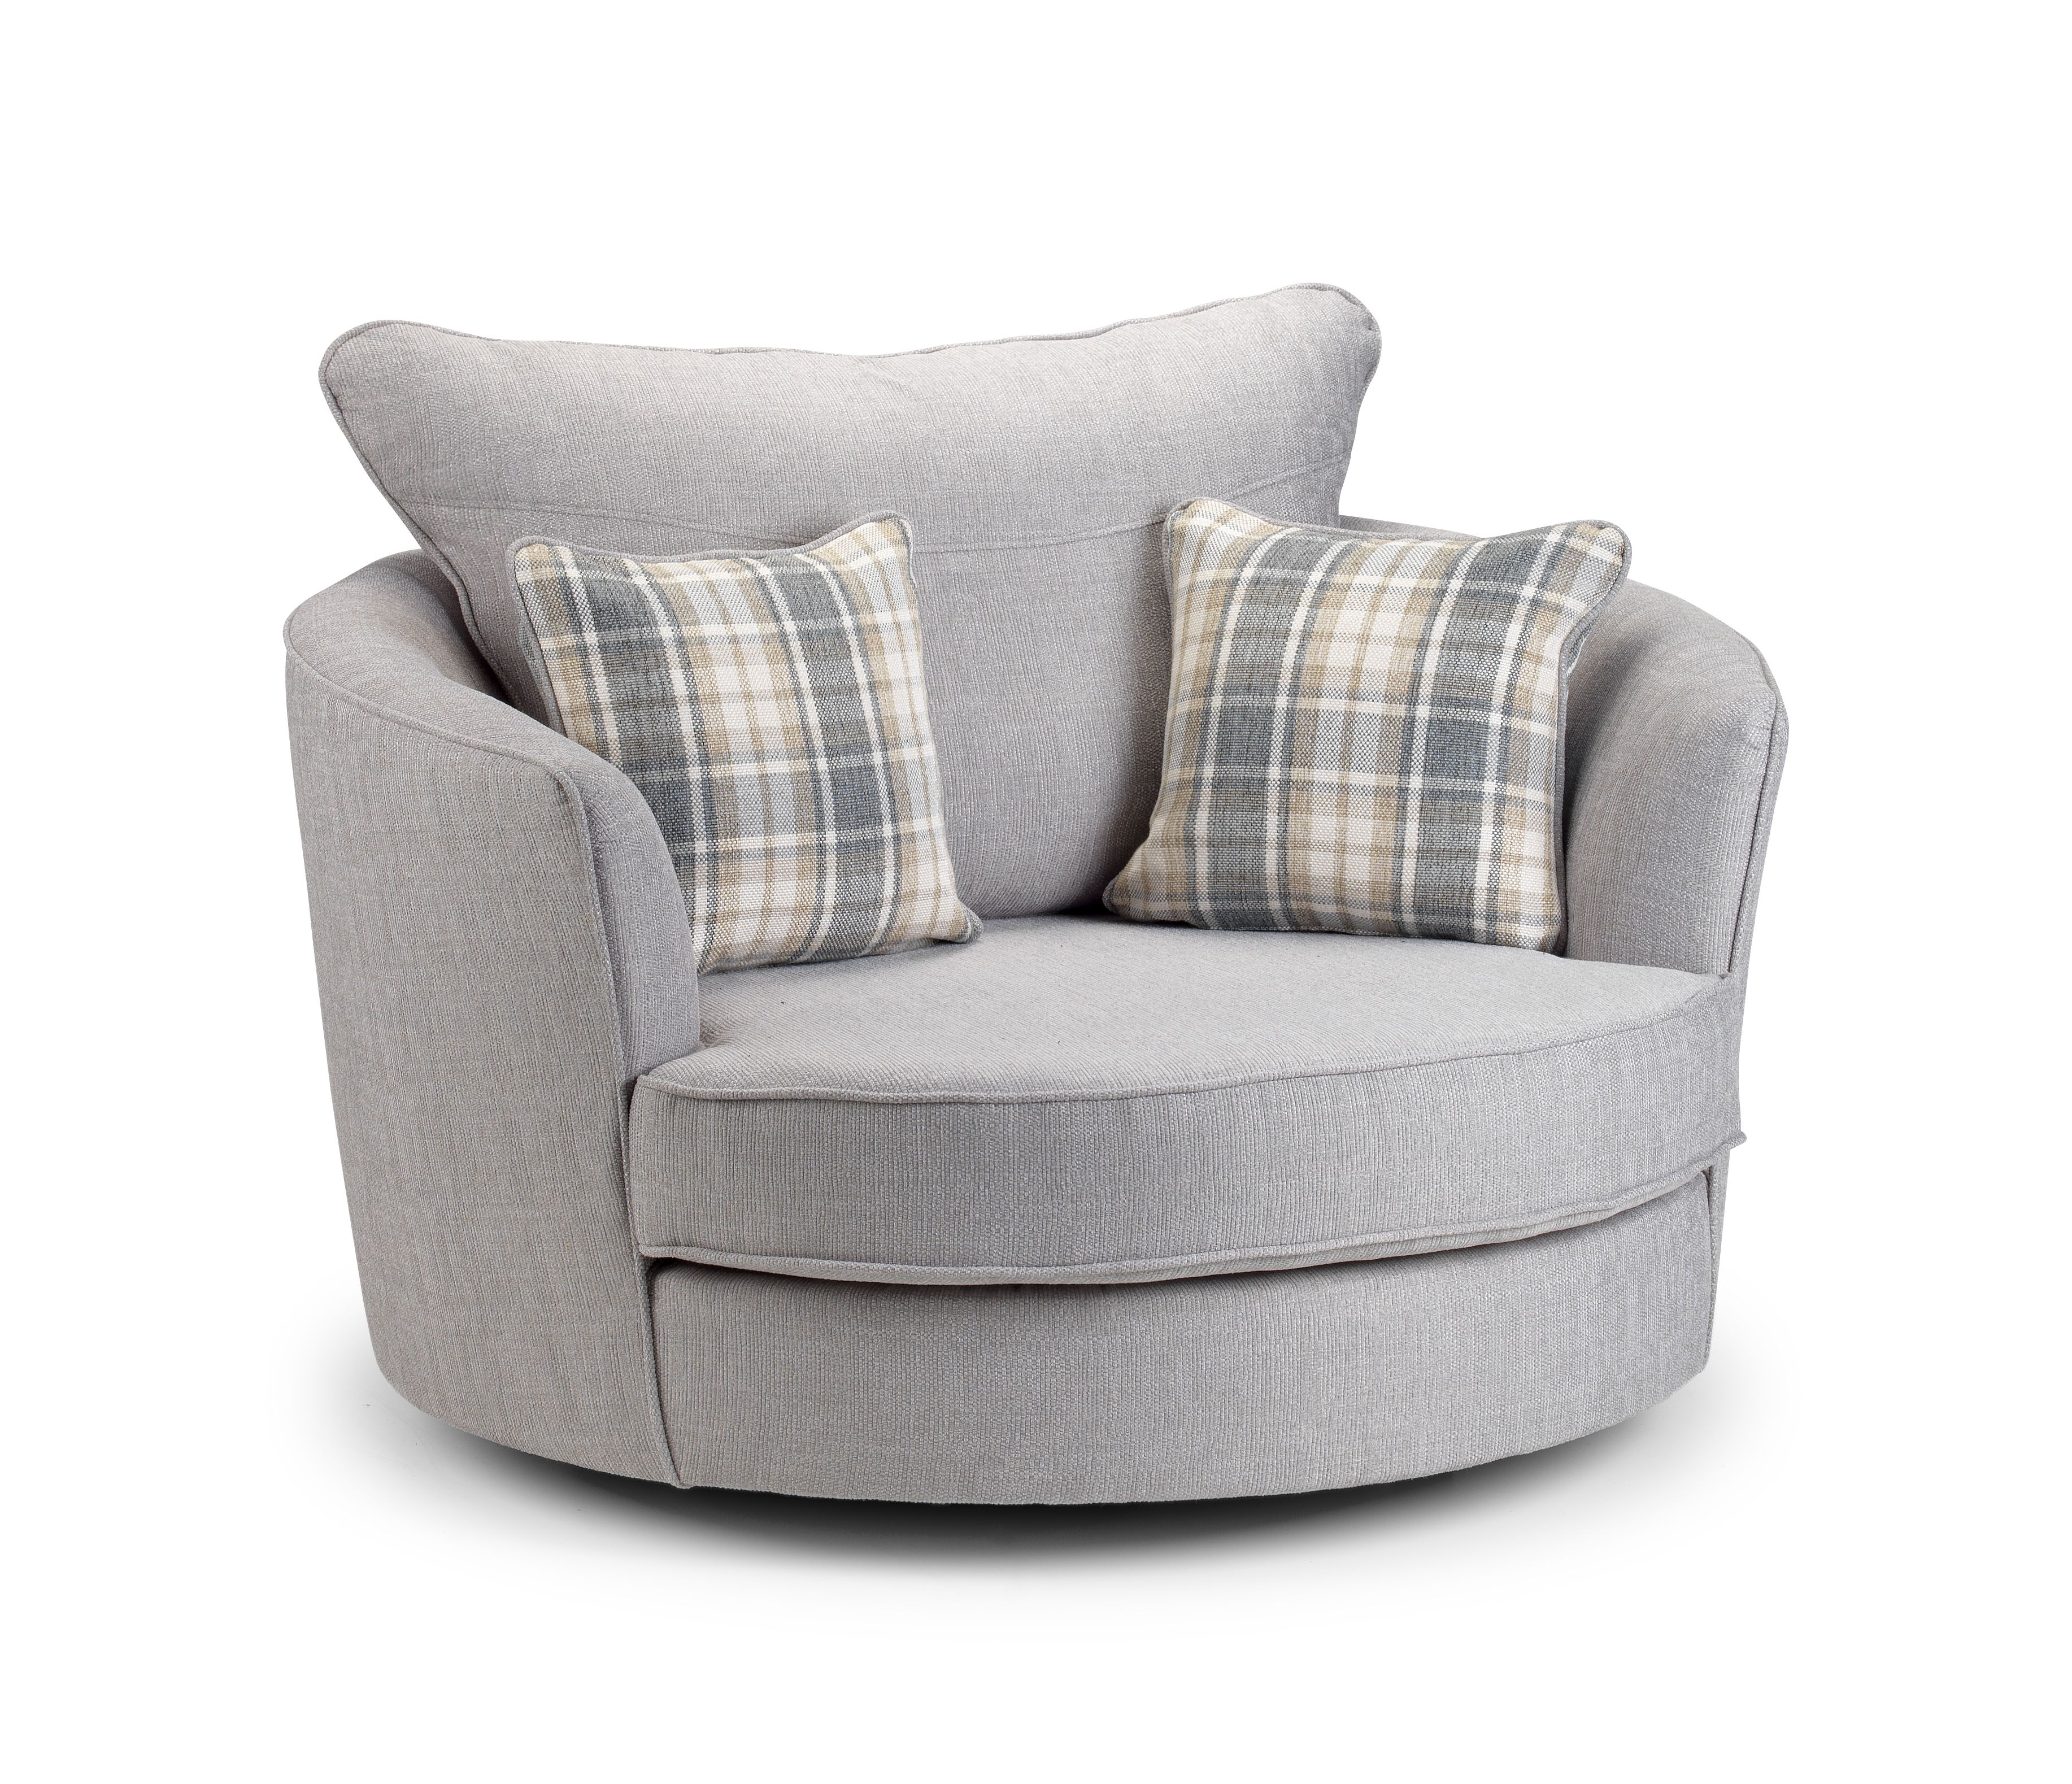 Awesome Round Swivel Sofa Chair Gallery Parabellum Throughout Round Sofa Chairs (View 3 of 15)